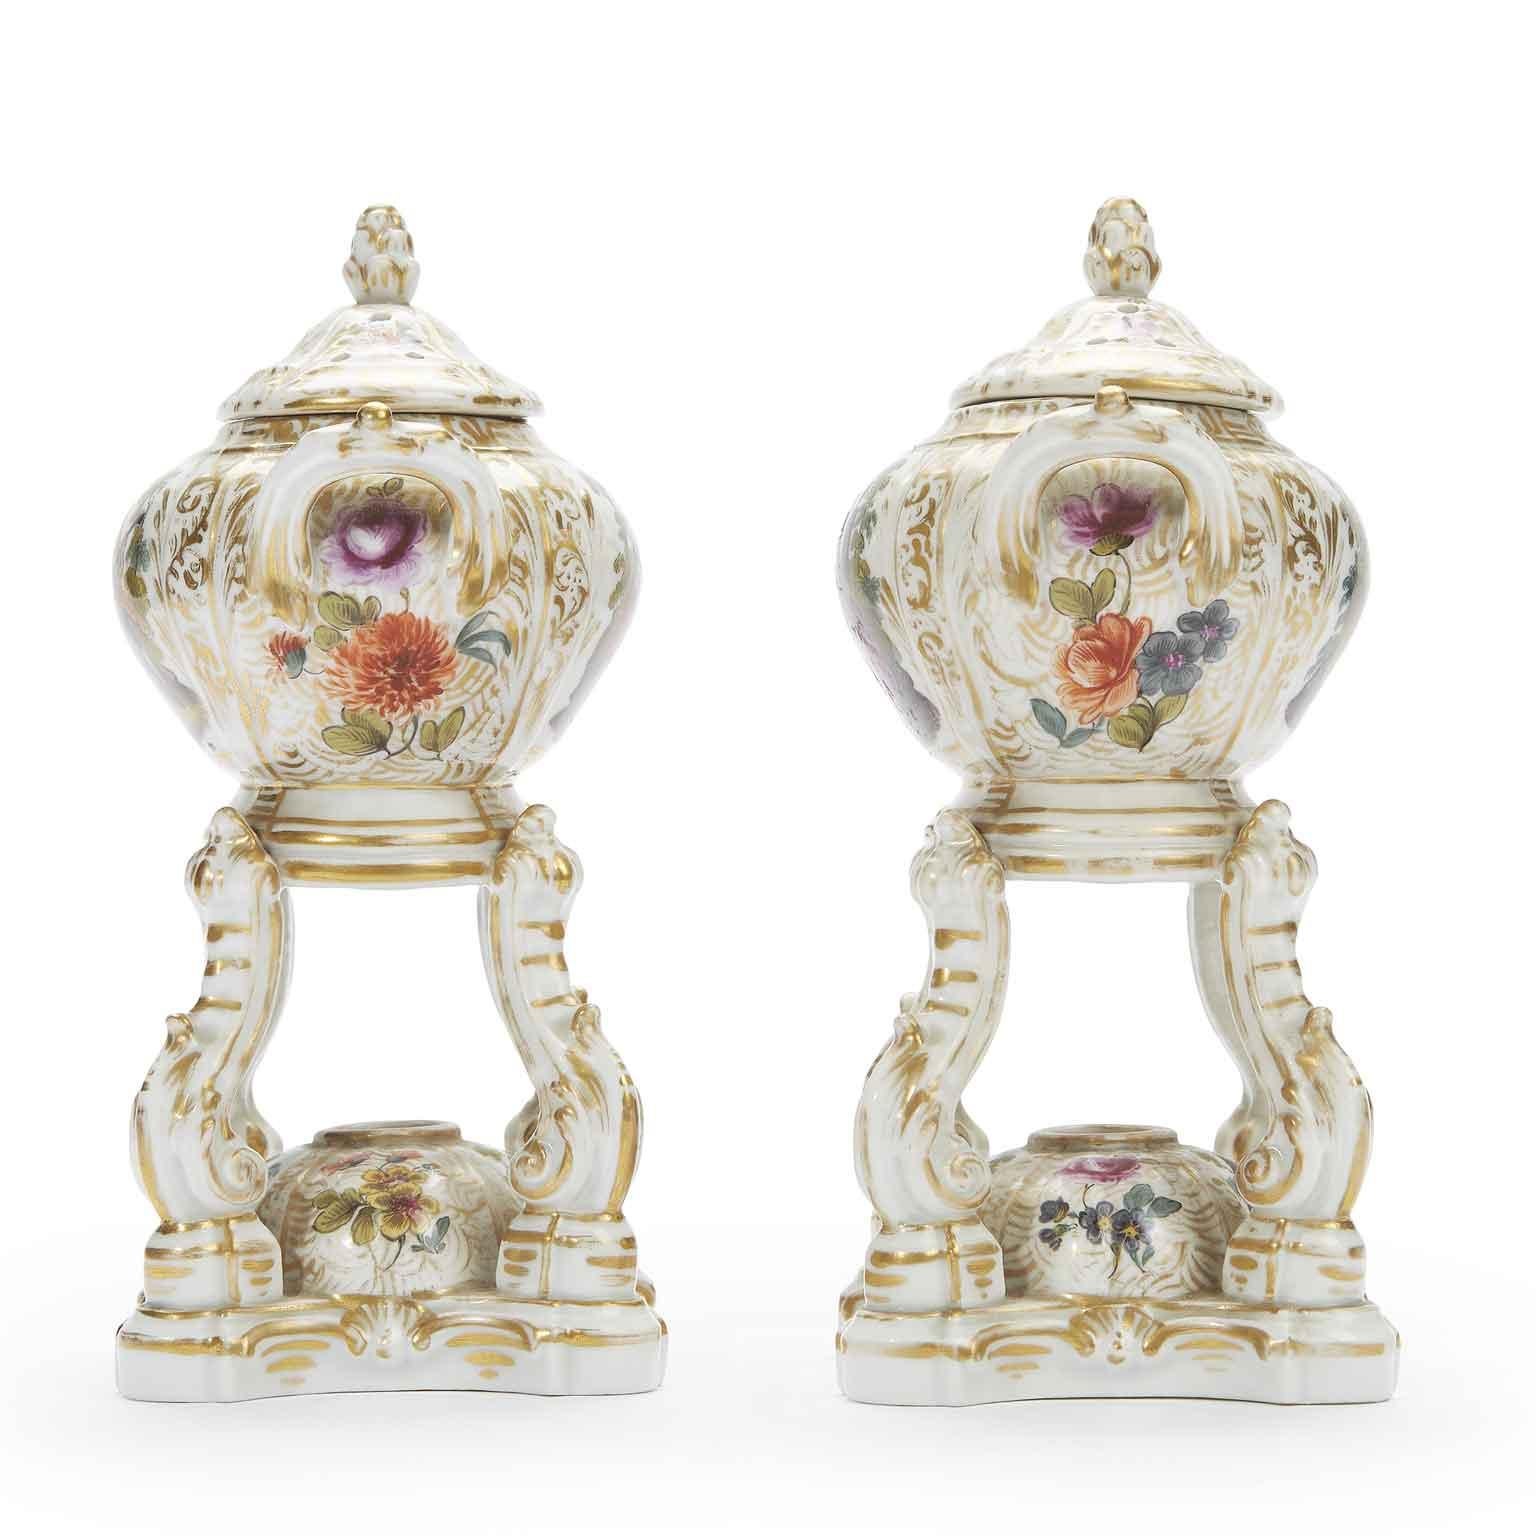 Rococo Pair of German Porcelain Pastille Incense Burners by KPM Berlin, 1820 For Sale